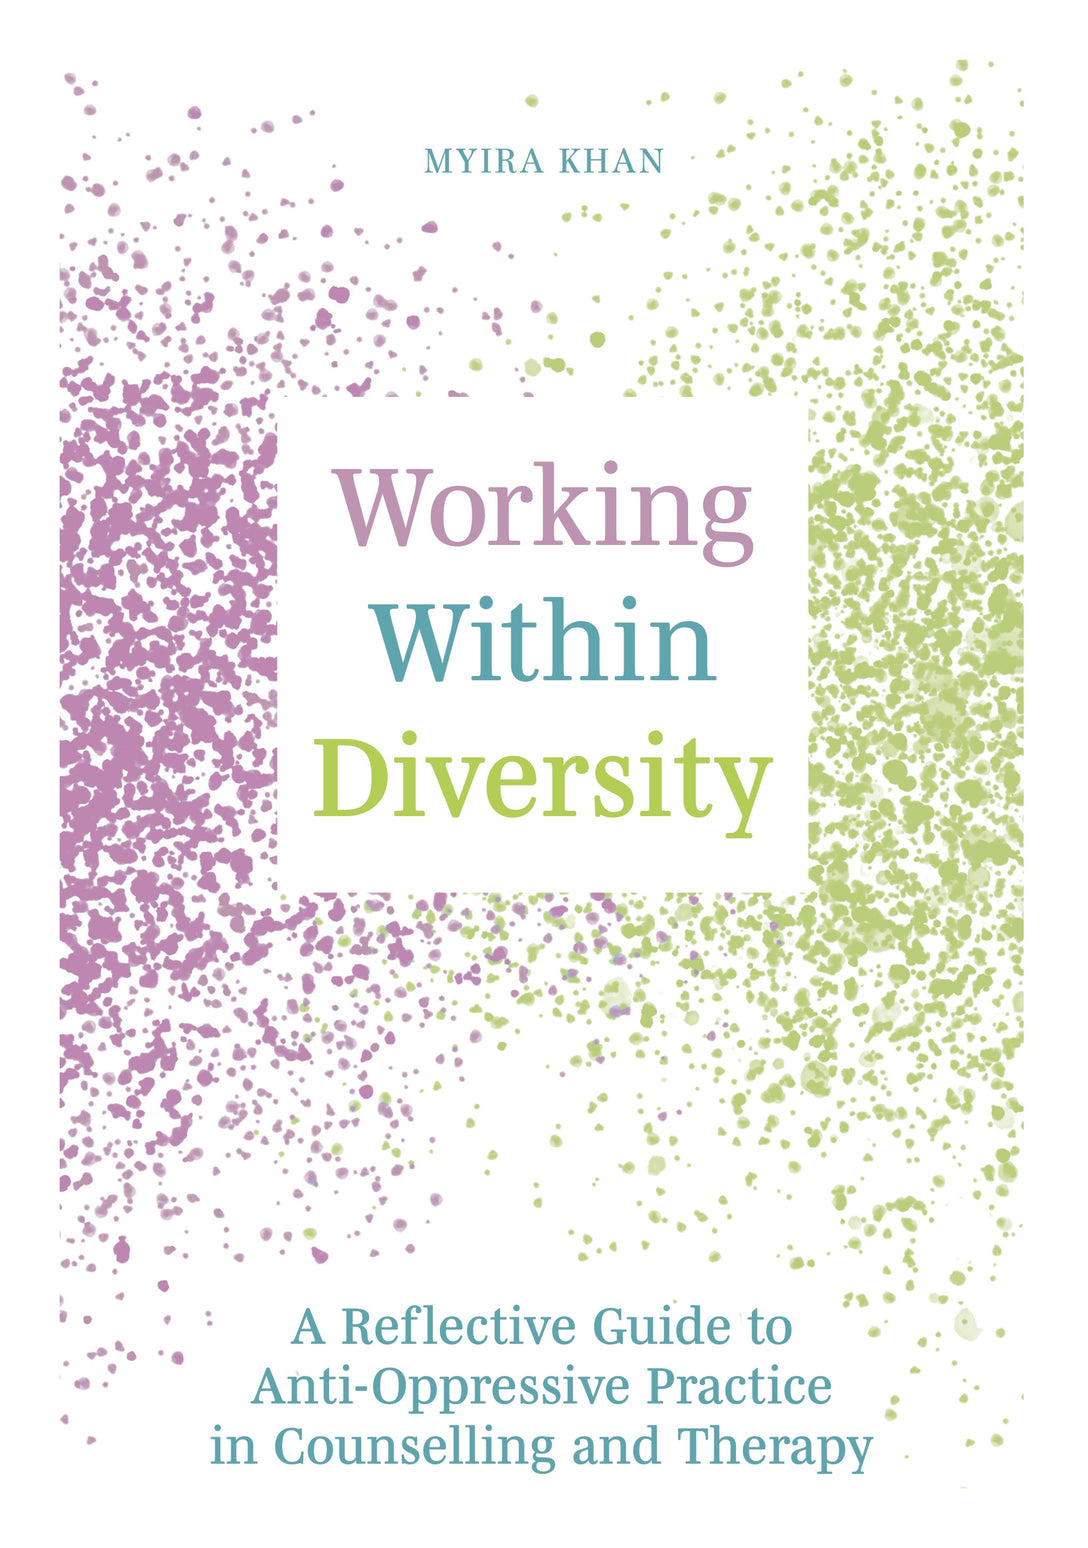 Working Within Diversity by Myira Khan